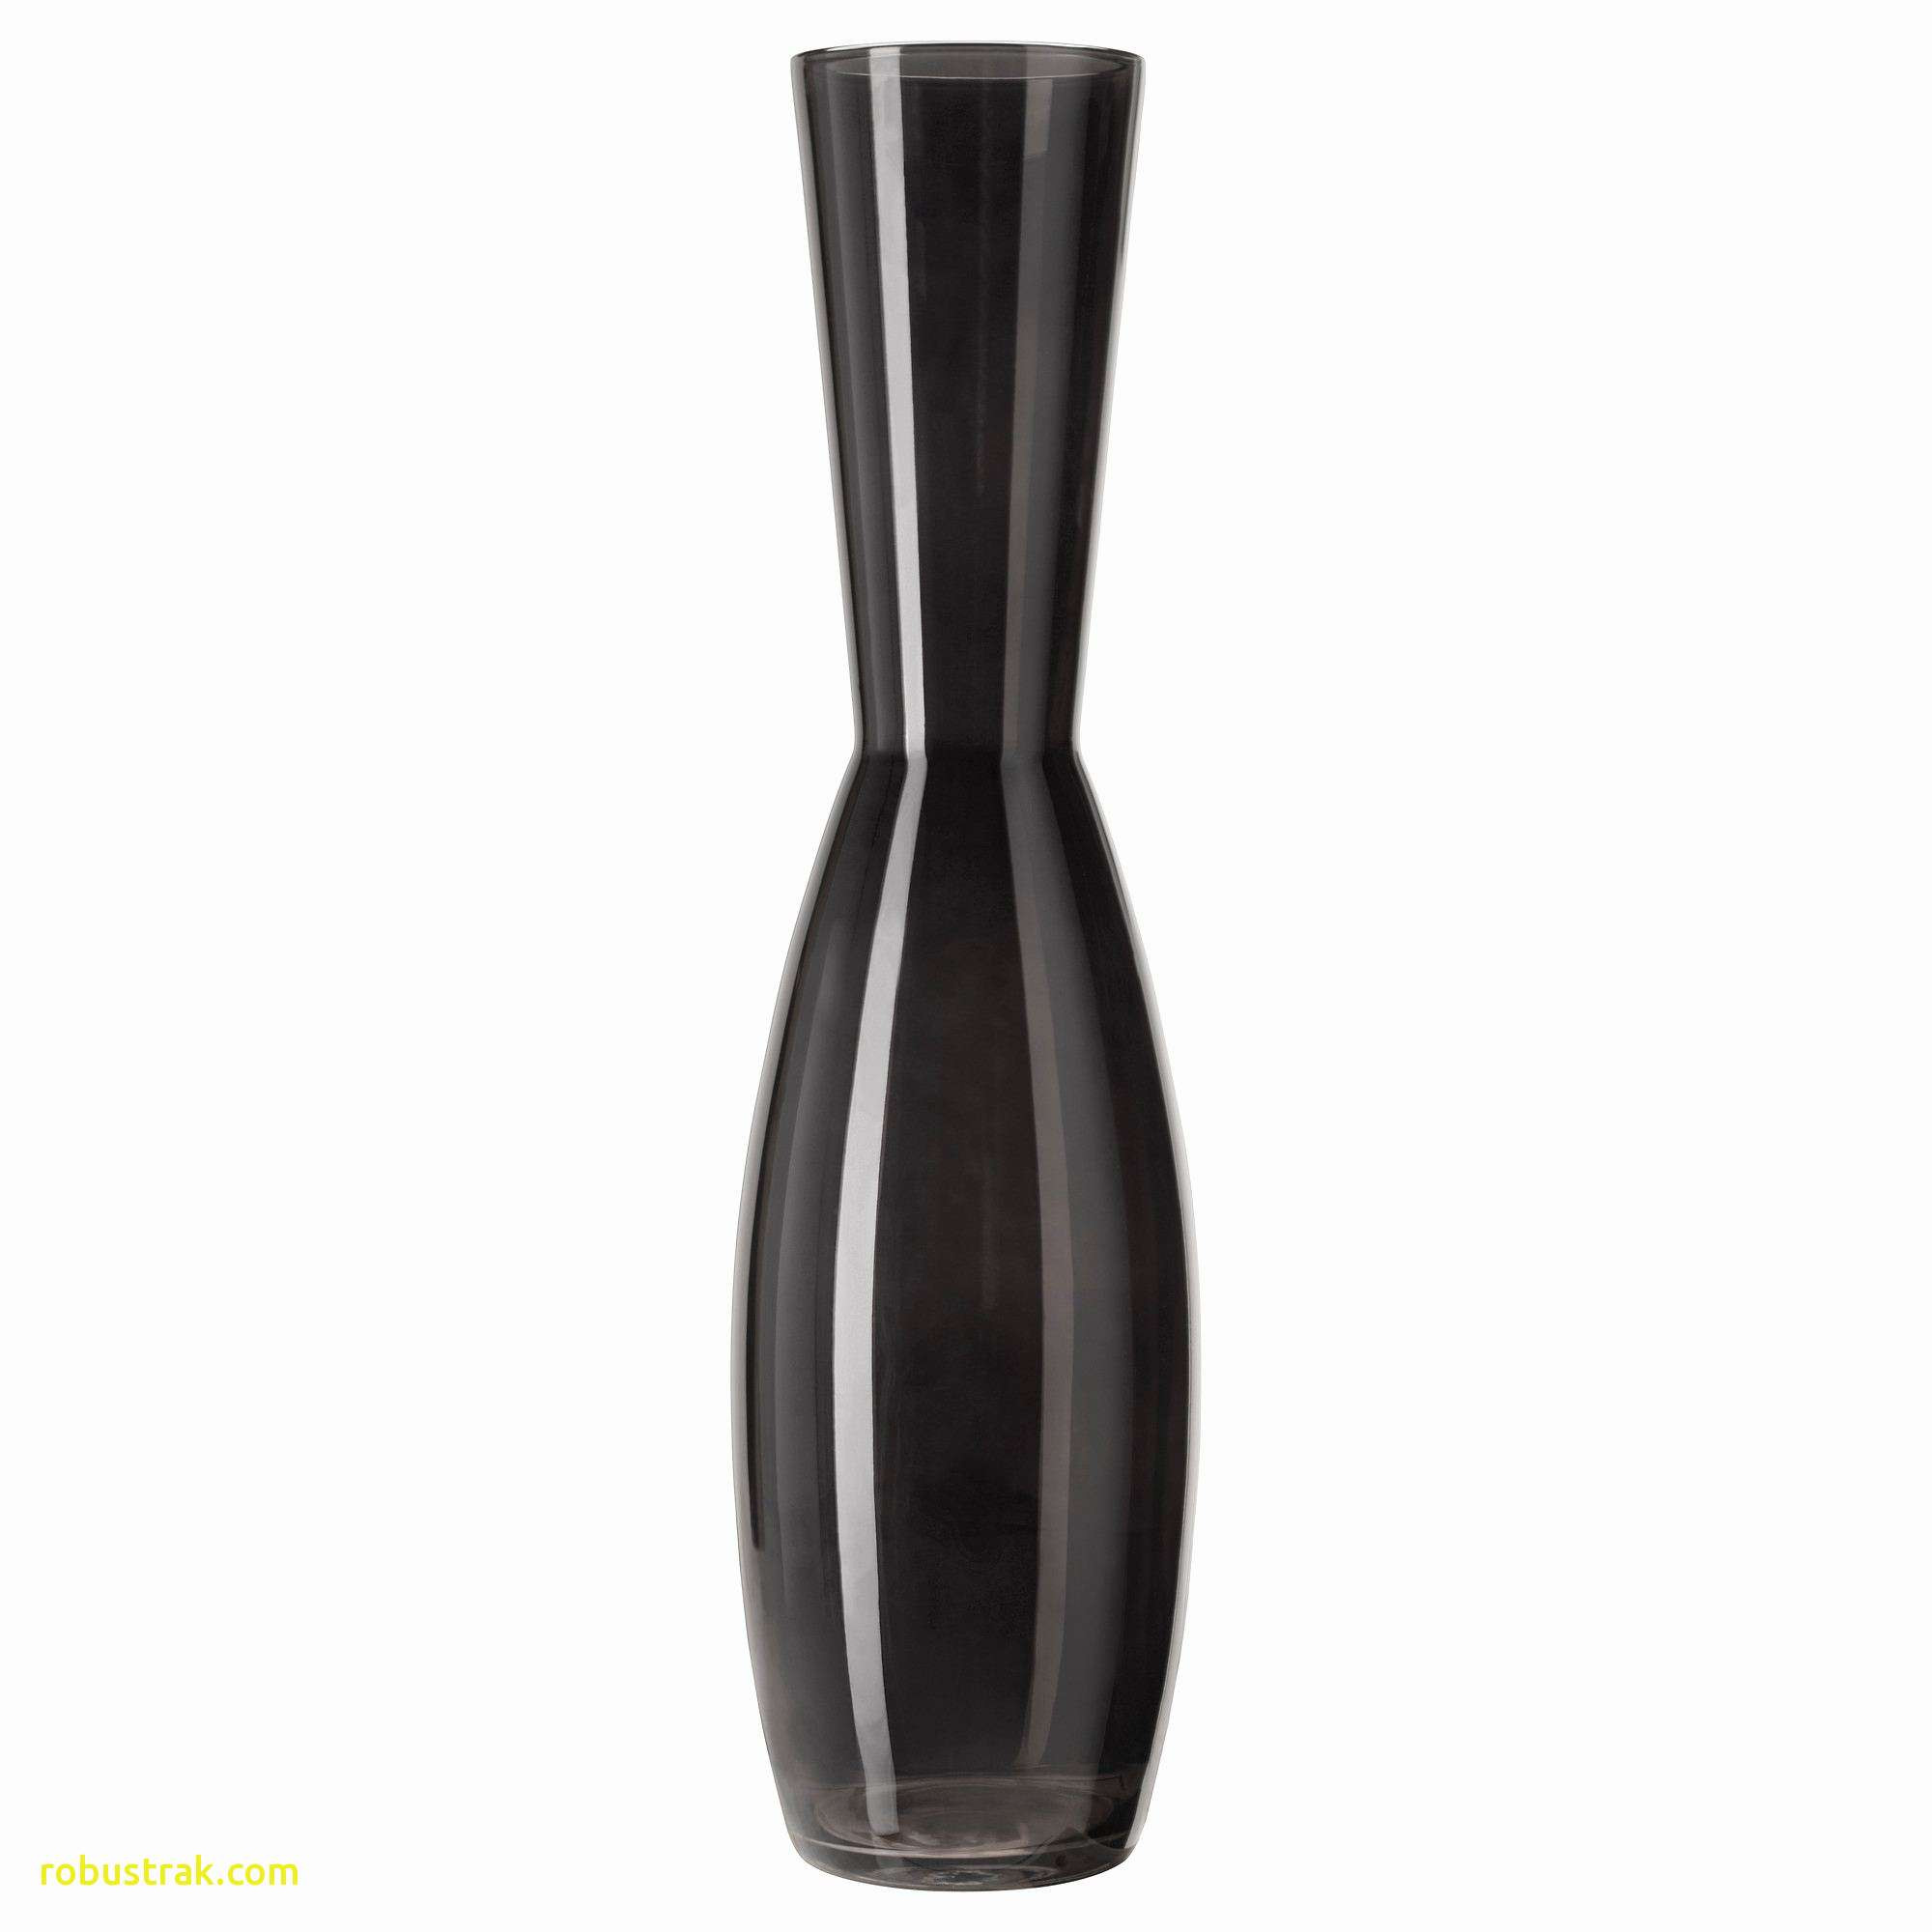 10 Nice Big Vases for Cheap 2024 free download big vases for cheap of unique floor vase ikea home design ideas intended for ikea krabb mirror ideas awesome pe s5h vases ikea floor vase i 0d canada white